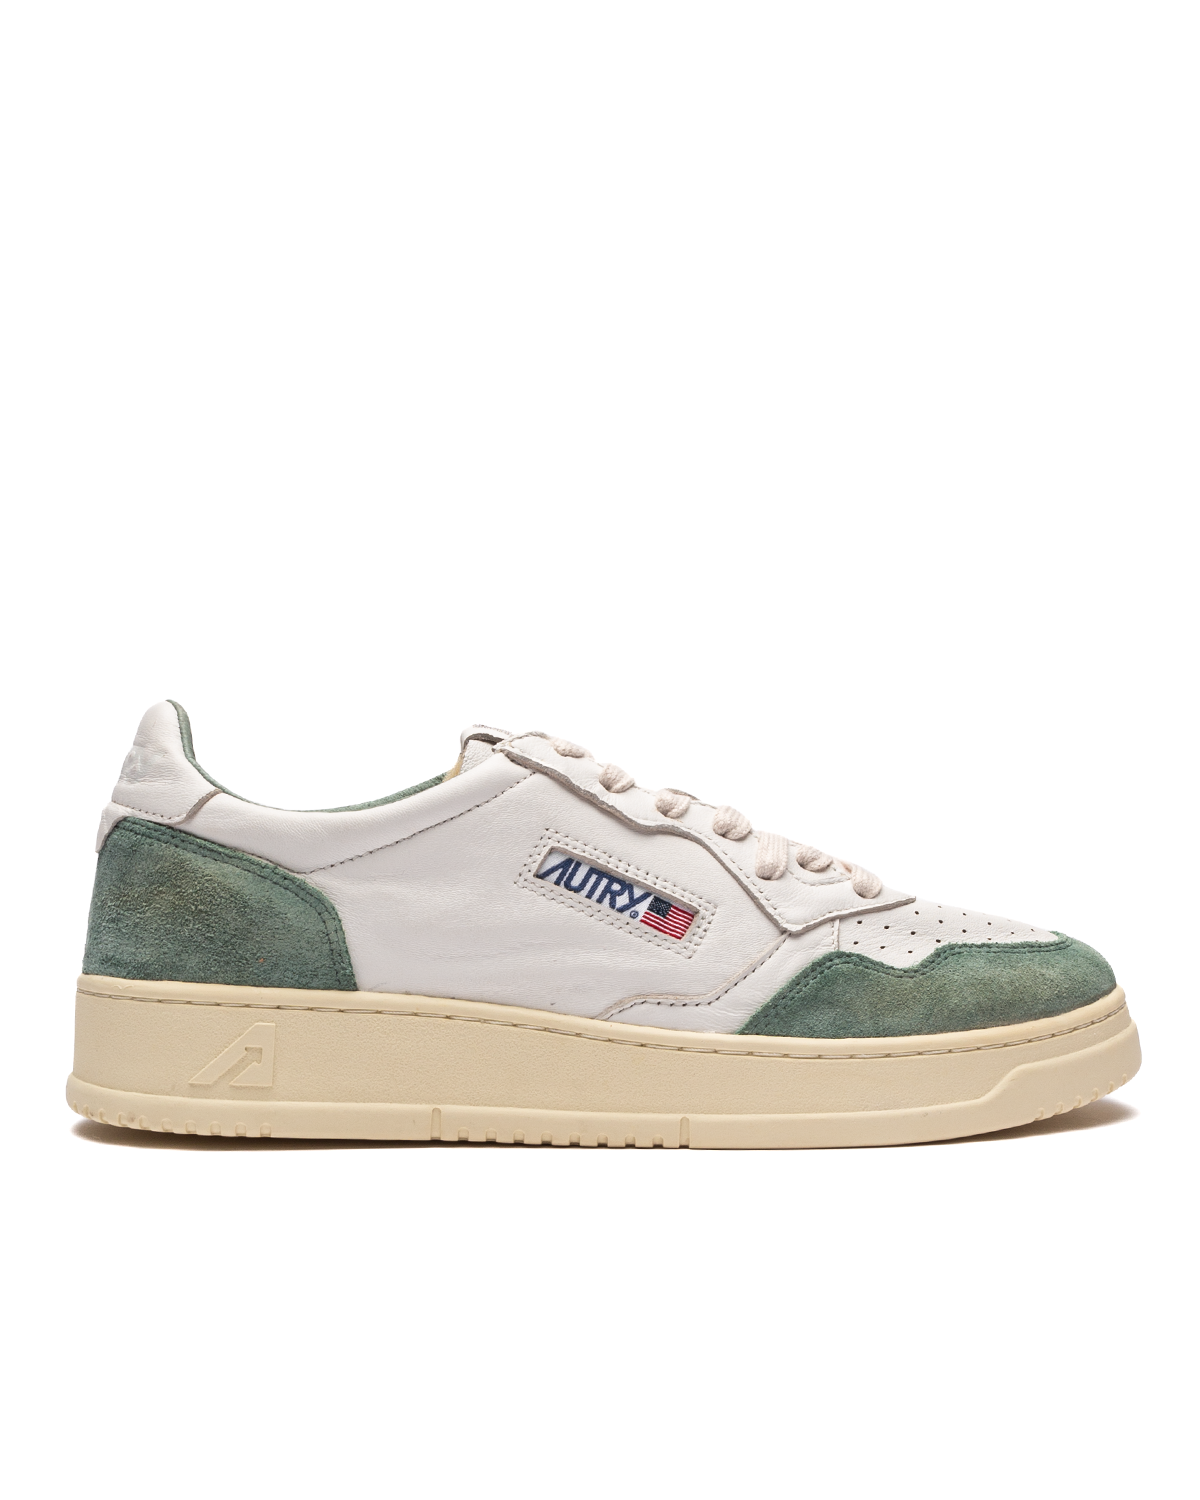 Medalist Goat Suede White/Military Green